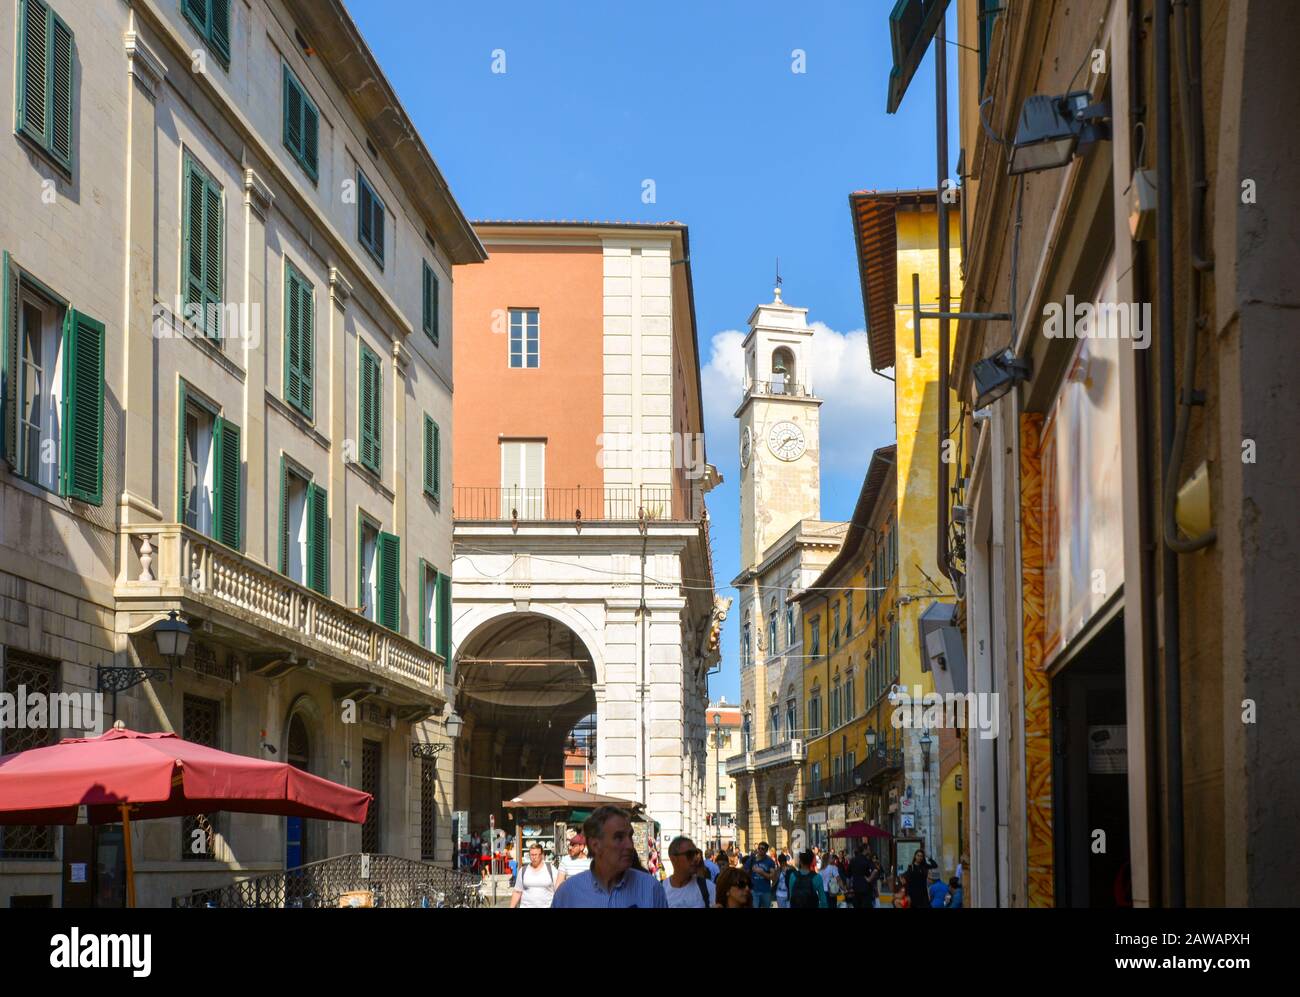 One Of The Many Church Bell Towers Above The Centro Storico Old Town Of Pisa Italy As Tourists Shop Under The Covered Porticos In Tuscany Stock Photo Alamy